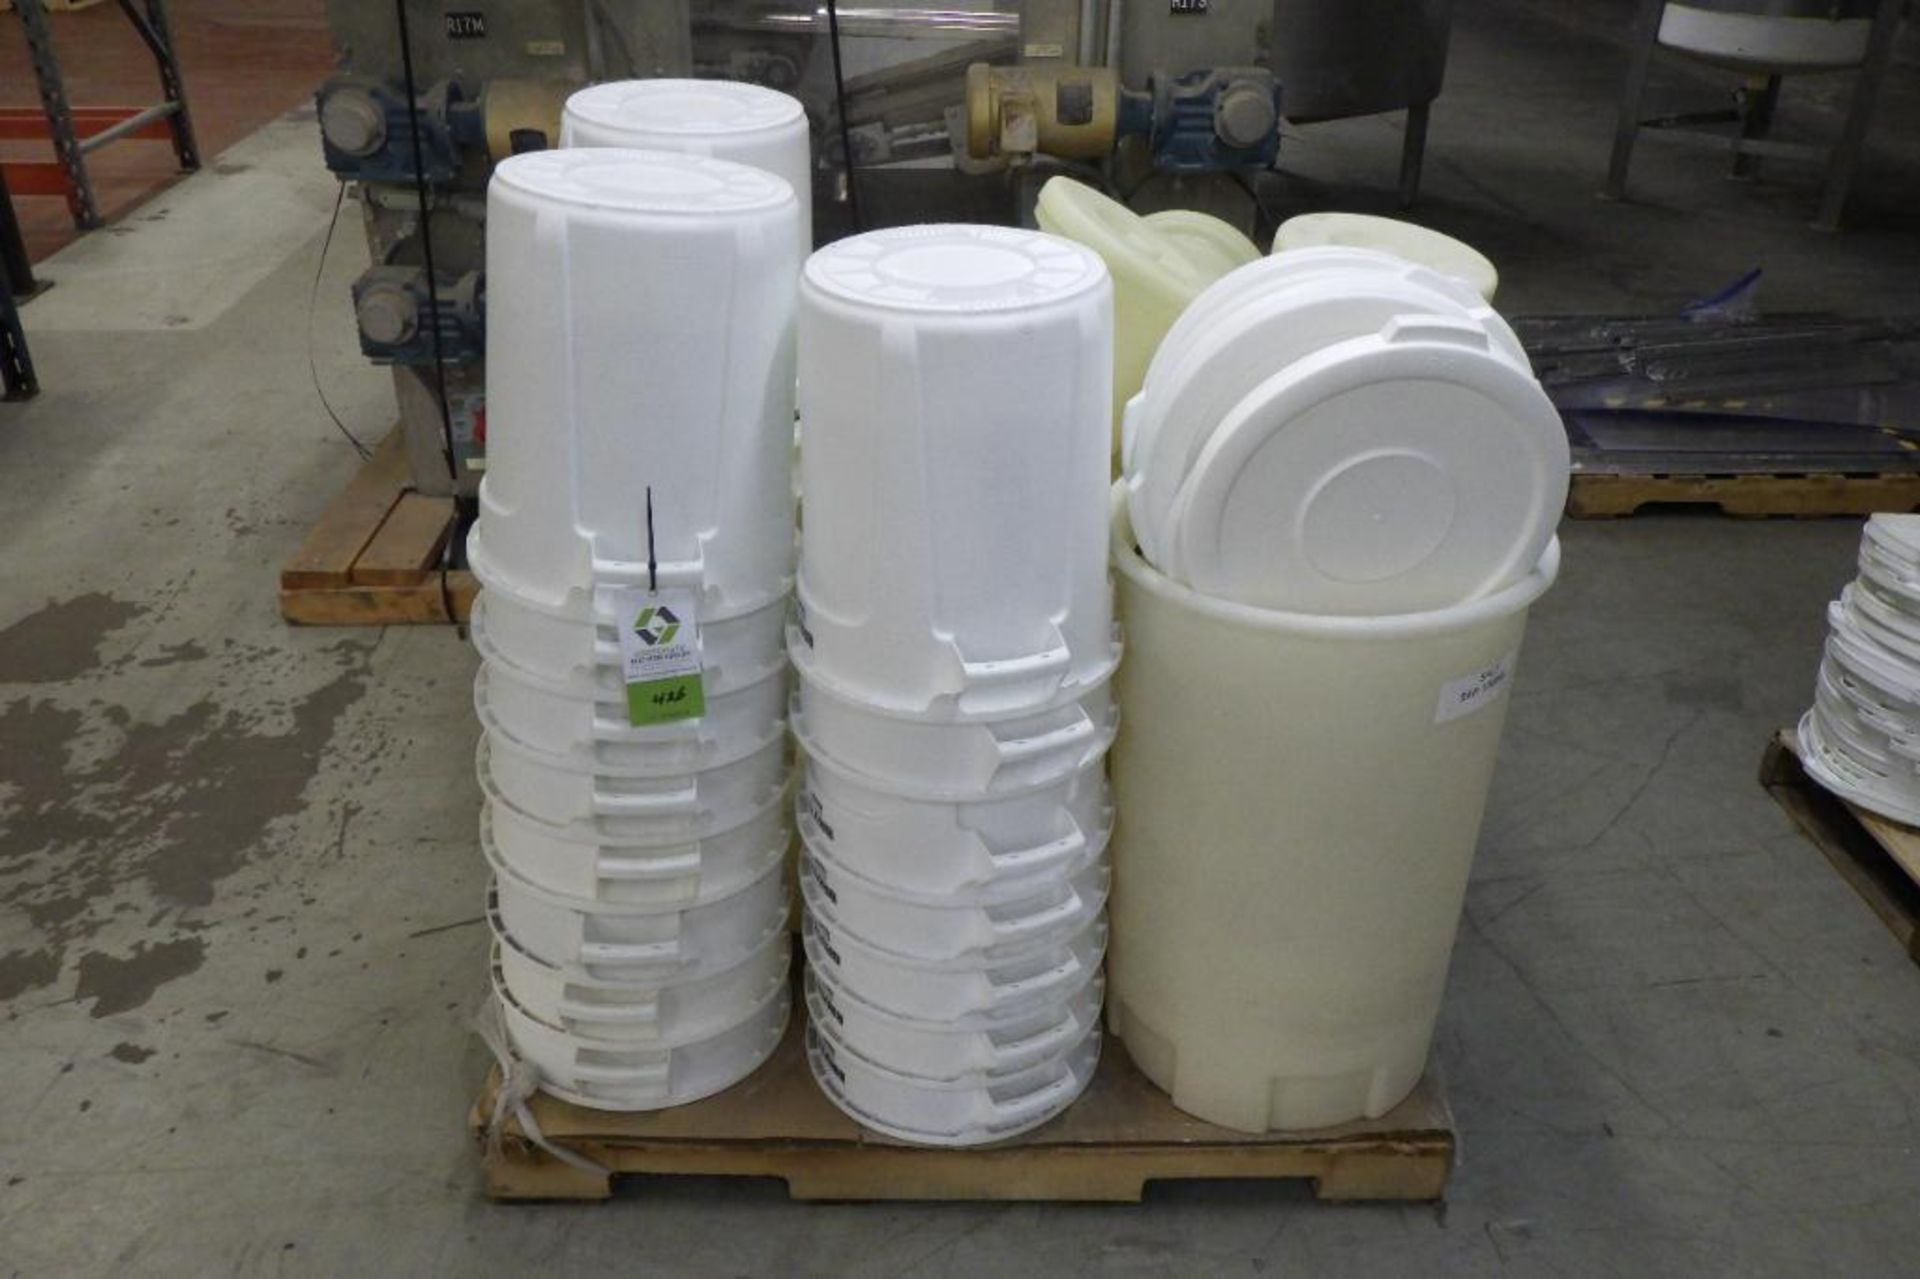 Pallet of white Rubbermaid trash bins with lids